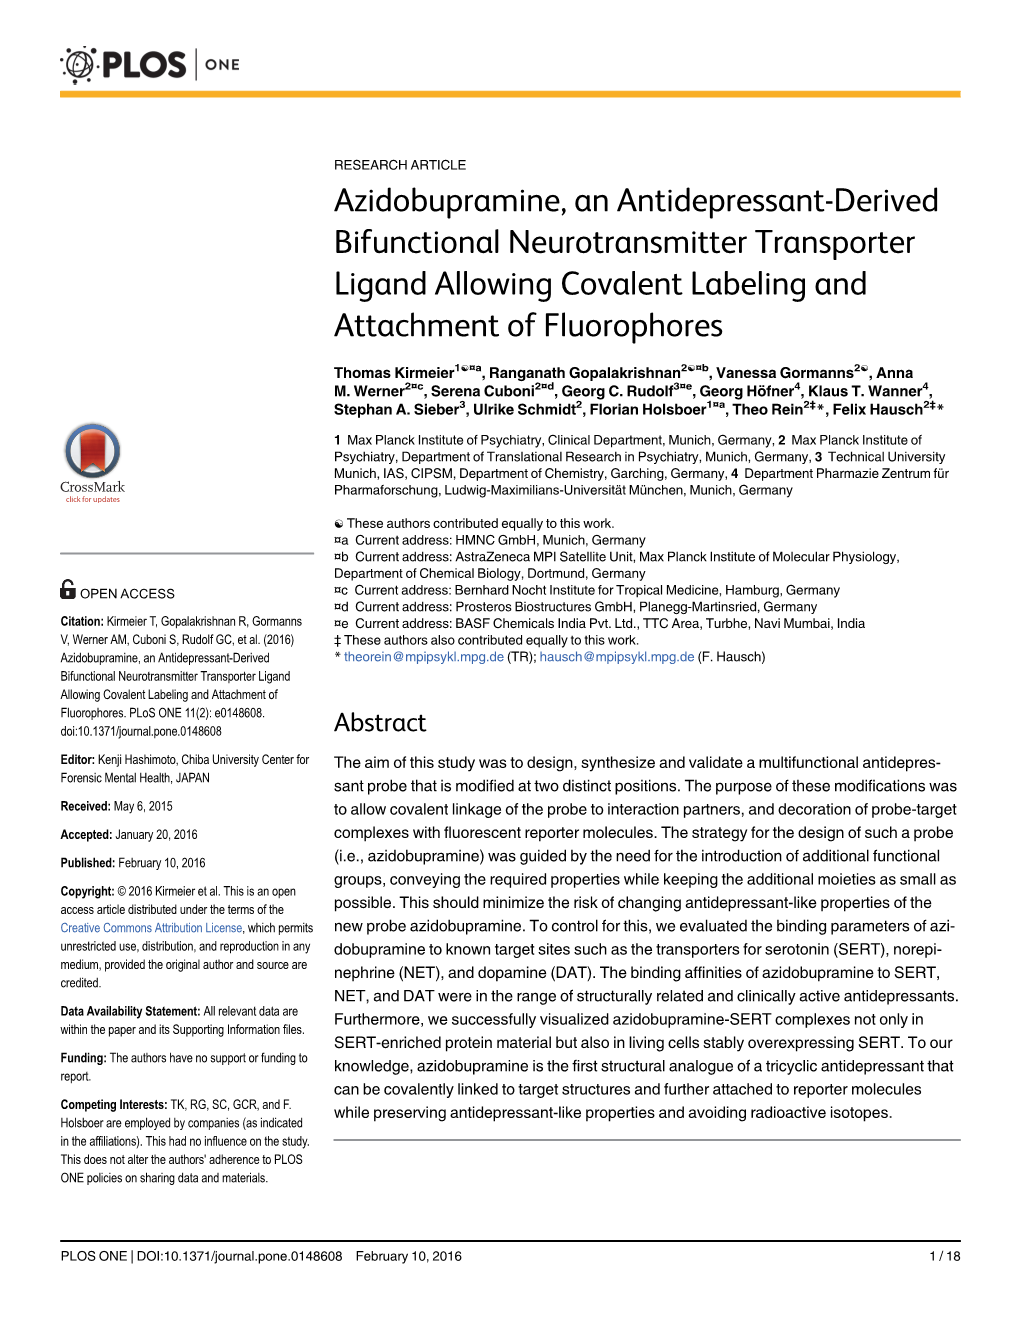 Azidobupramine, an Antidepressant-Derived Bifunctional Neurotransmitter Transporter Ligand Allowing Covalent Labeling and Attachment of Fluorophores